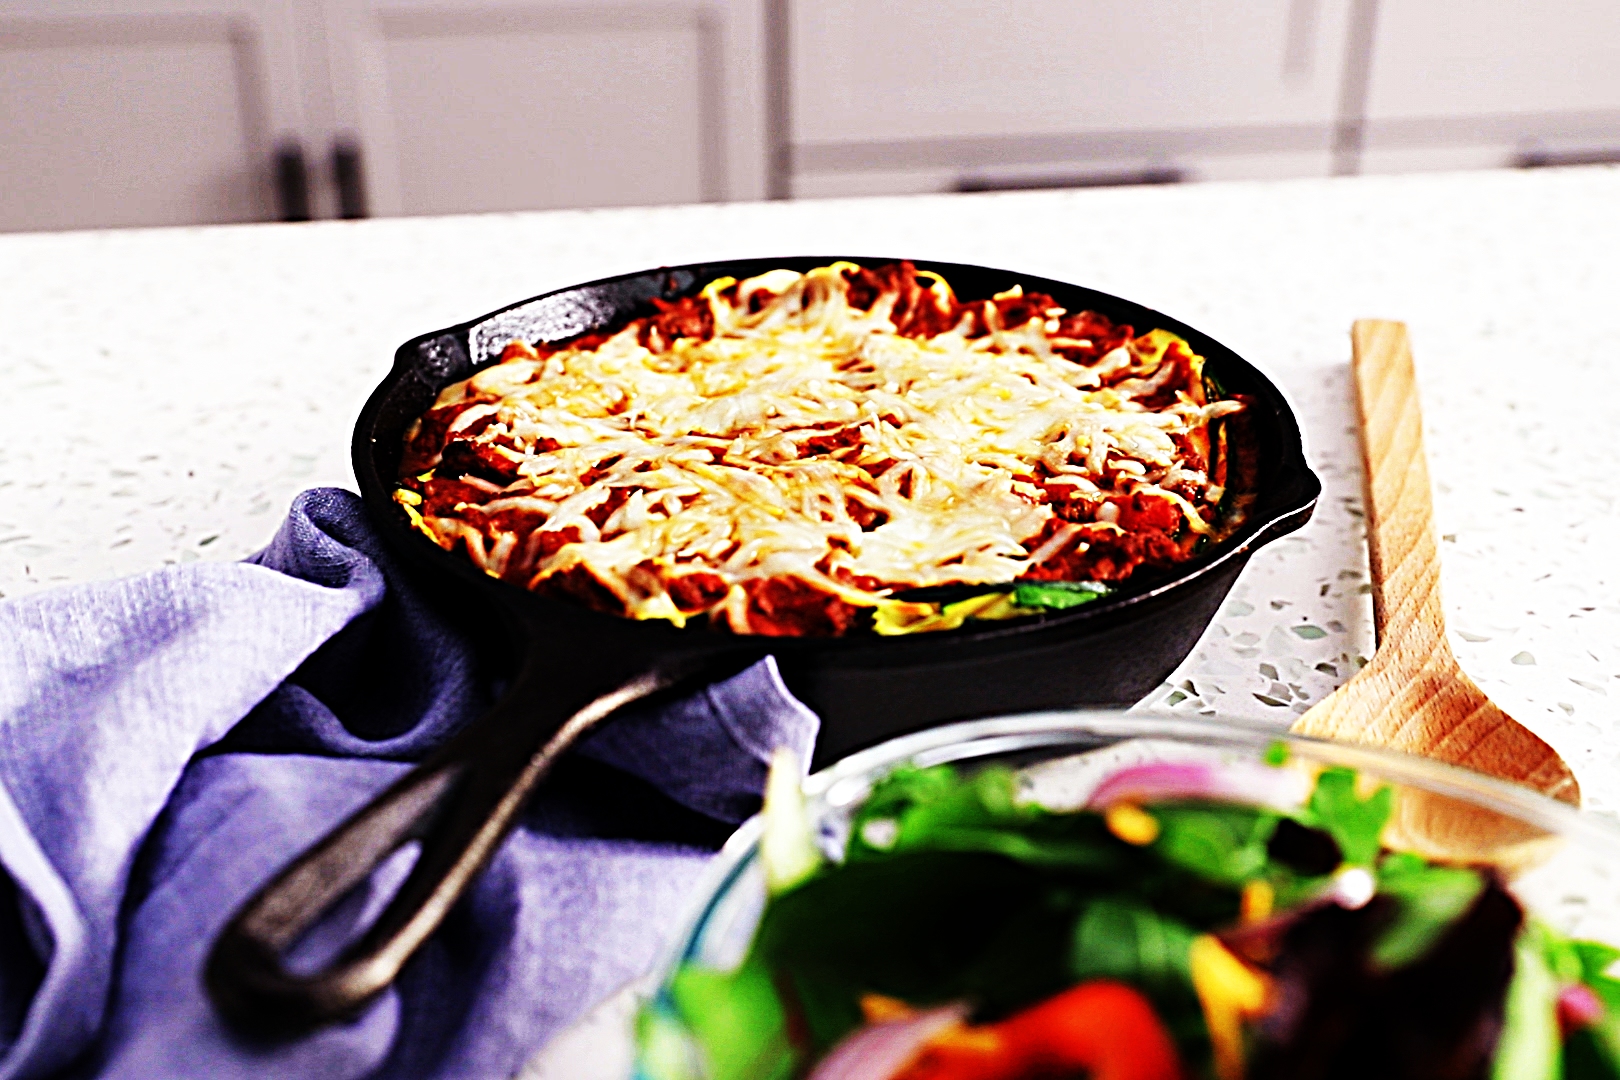 Stupid-Easy Recipe for Skillet Zucchini Noodle Lasagna (#1 Top-Rated)